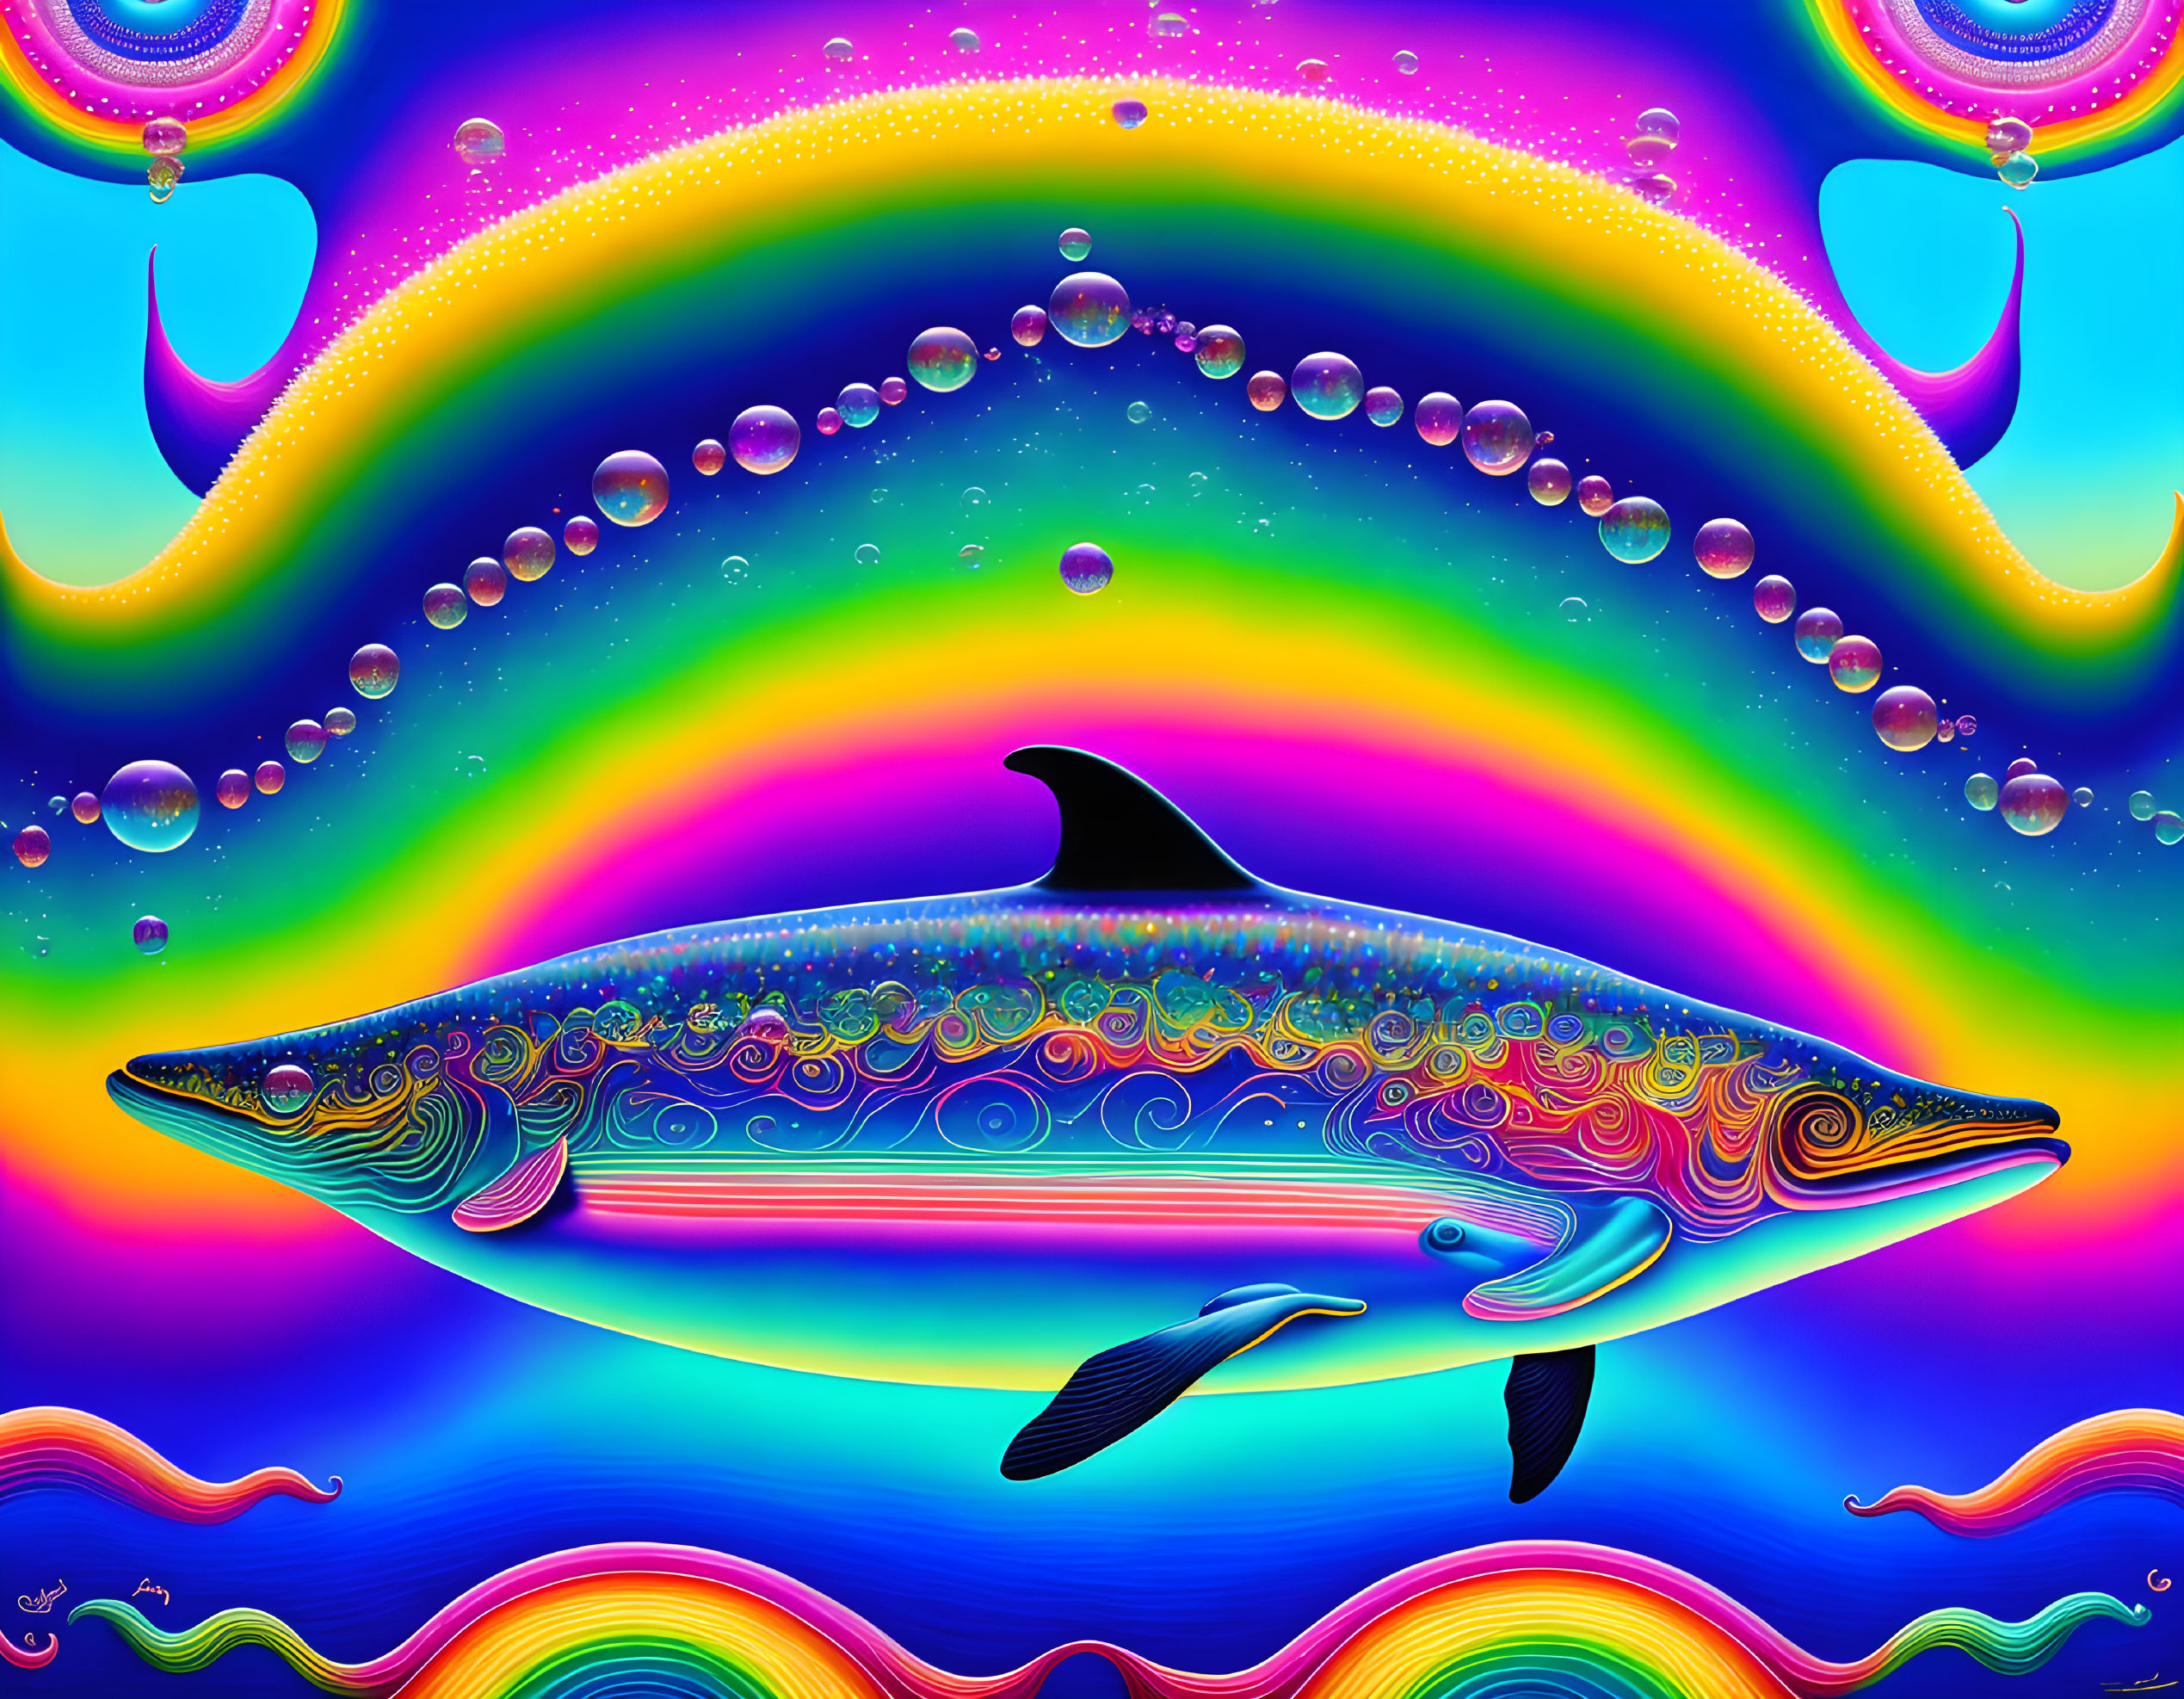 Psychedelic orca